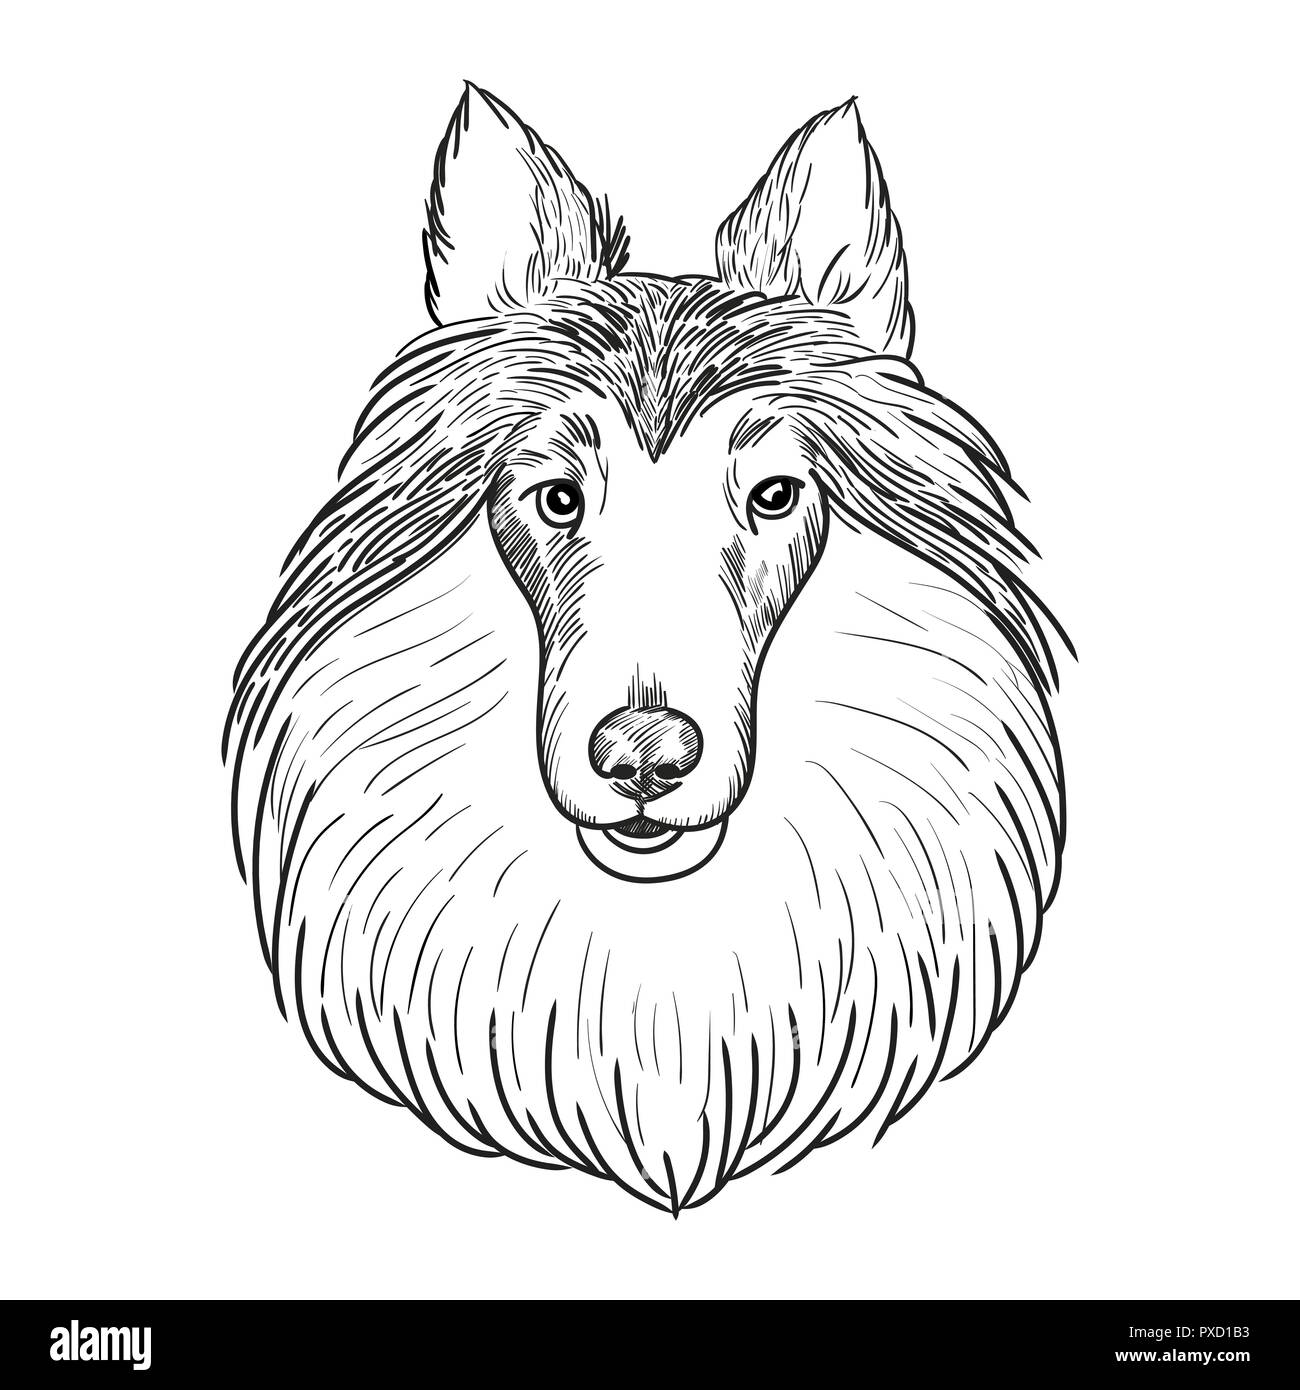 Collie face isolated on white background. Sheltie hand drawn sketch. Stock Vector